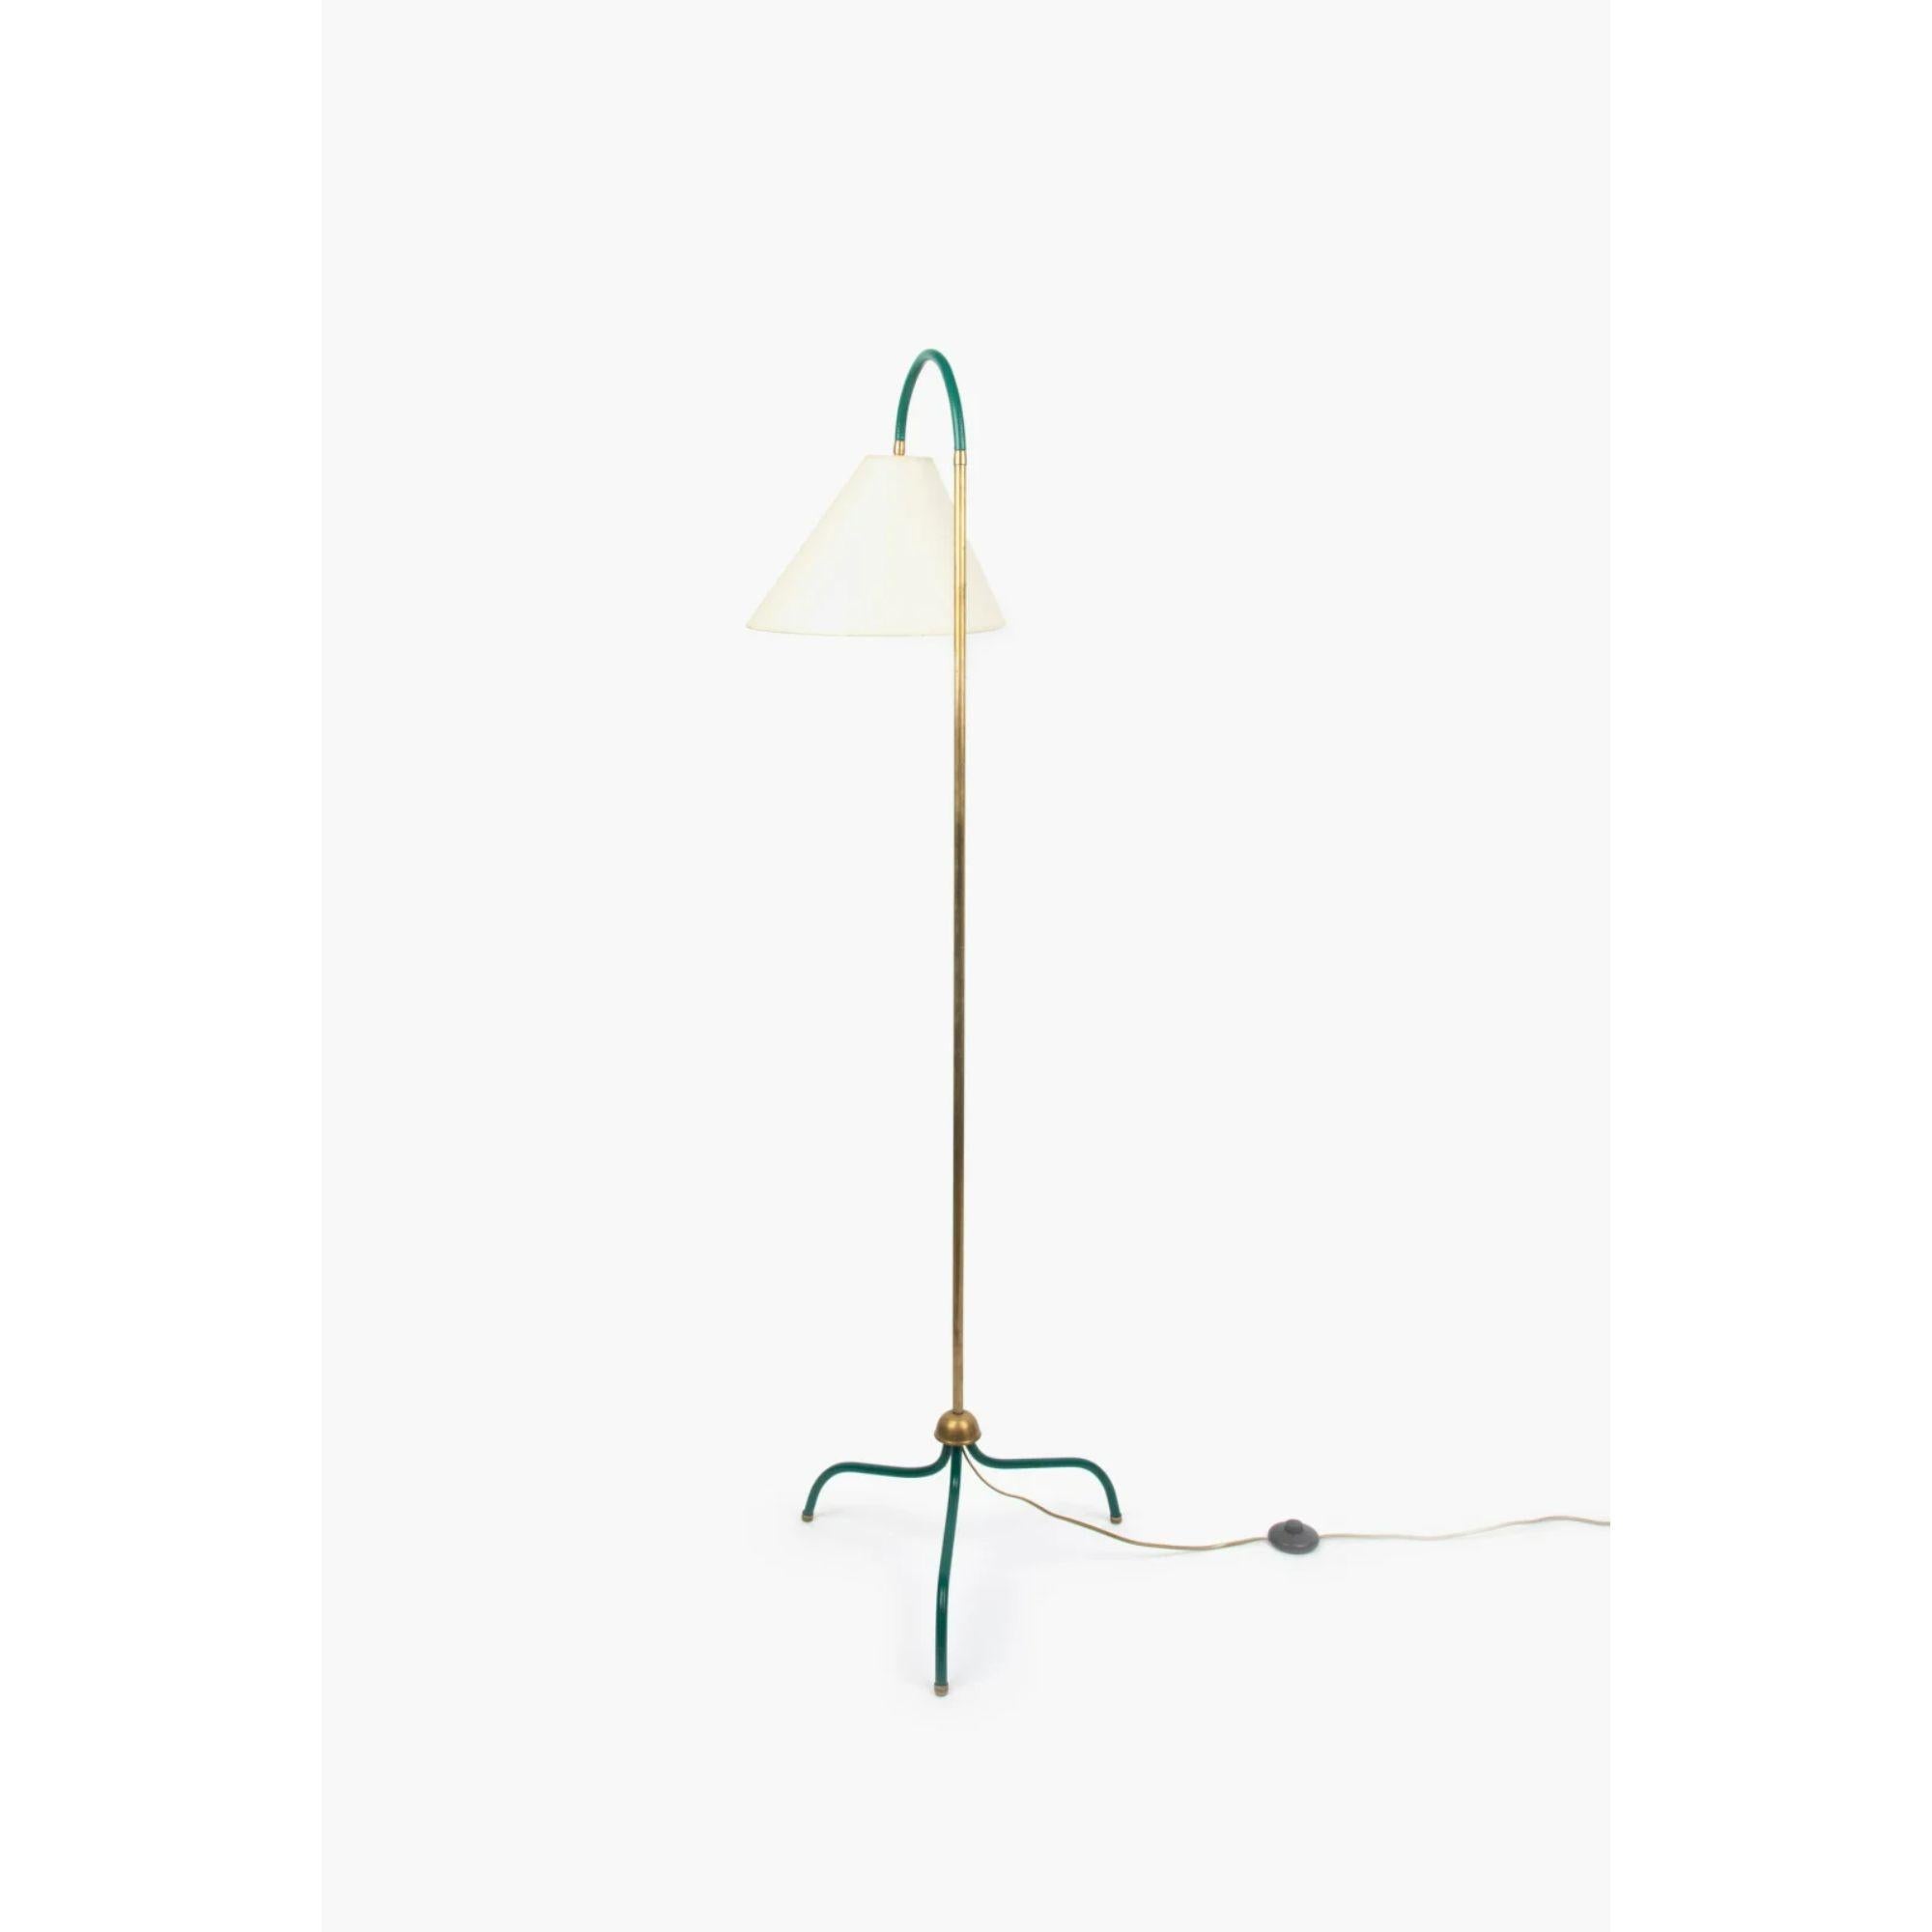 French articulated floor lamp, 1960s.

A 1960s French brass floor lamp with flexible neck. The tripod base legs are made in green lacquered brass terminating in brass cup feet.

Shade: Fitted with original asymmetric cream card shade. First